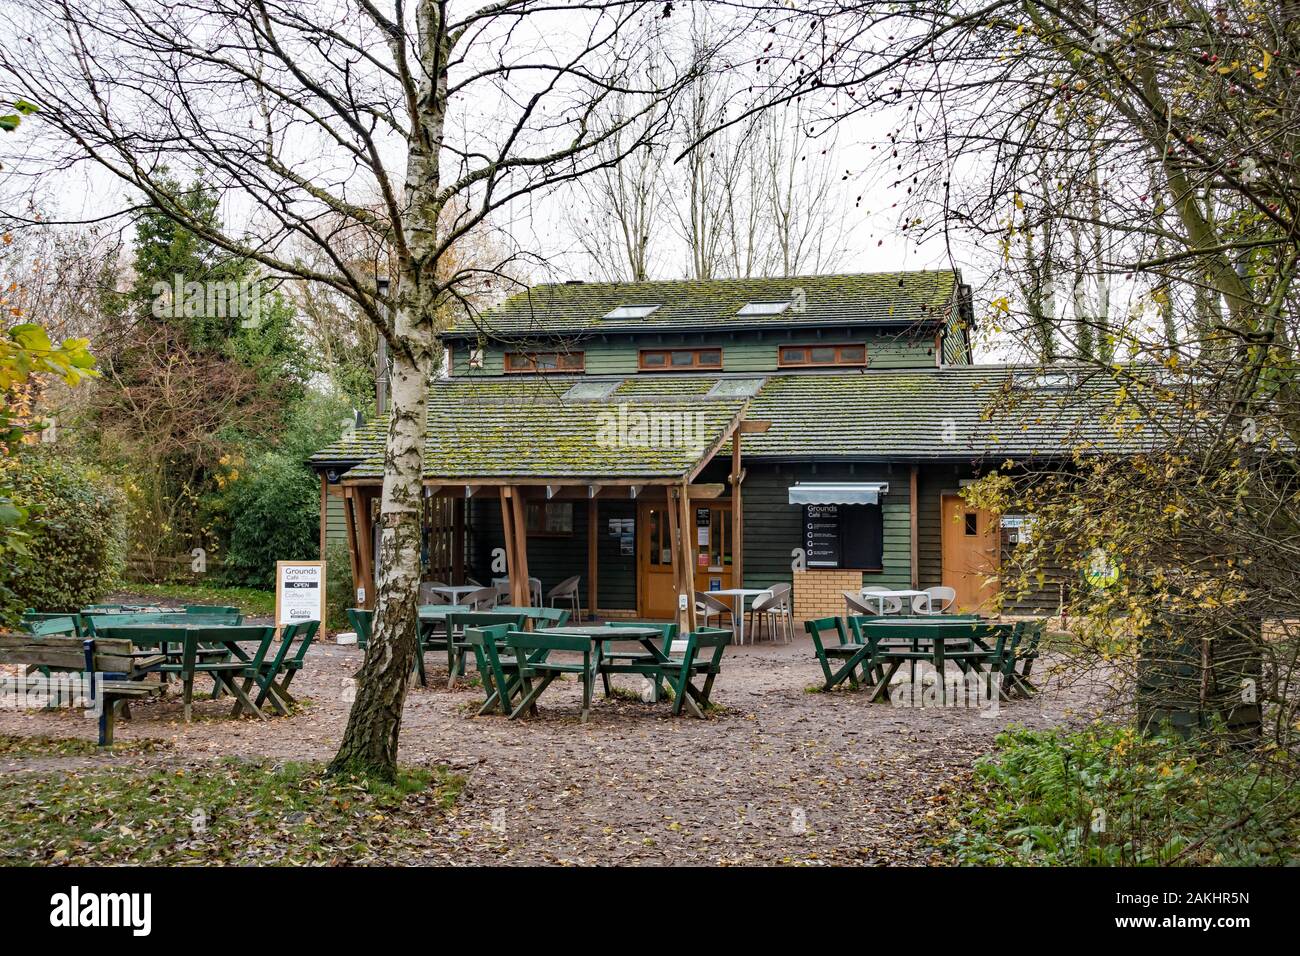 Milton park coffee shop and rangers office 2019 Stock Photo